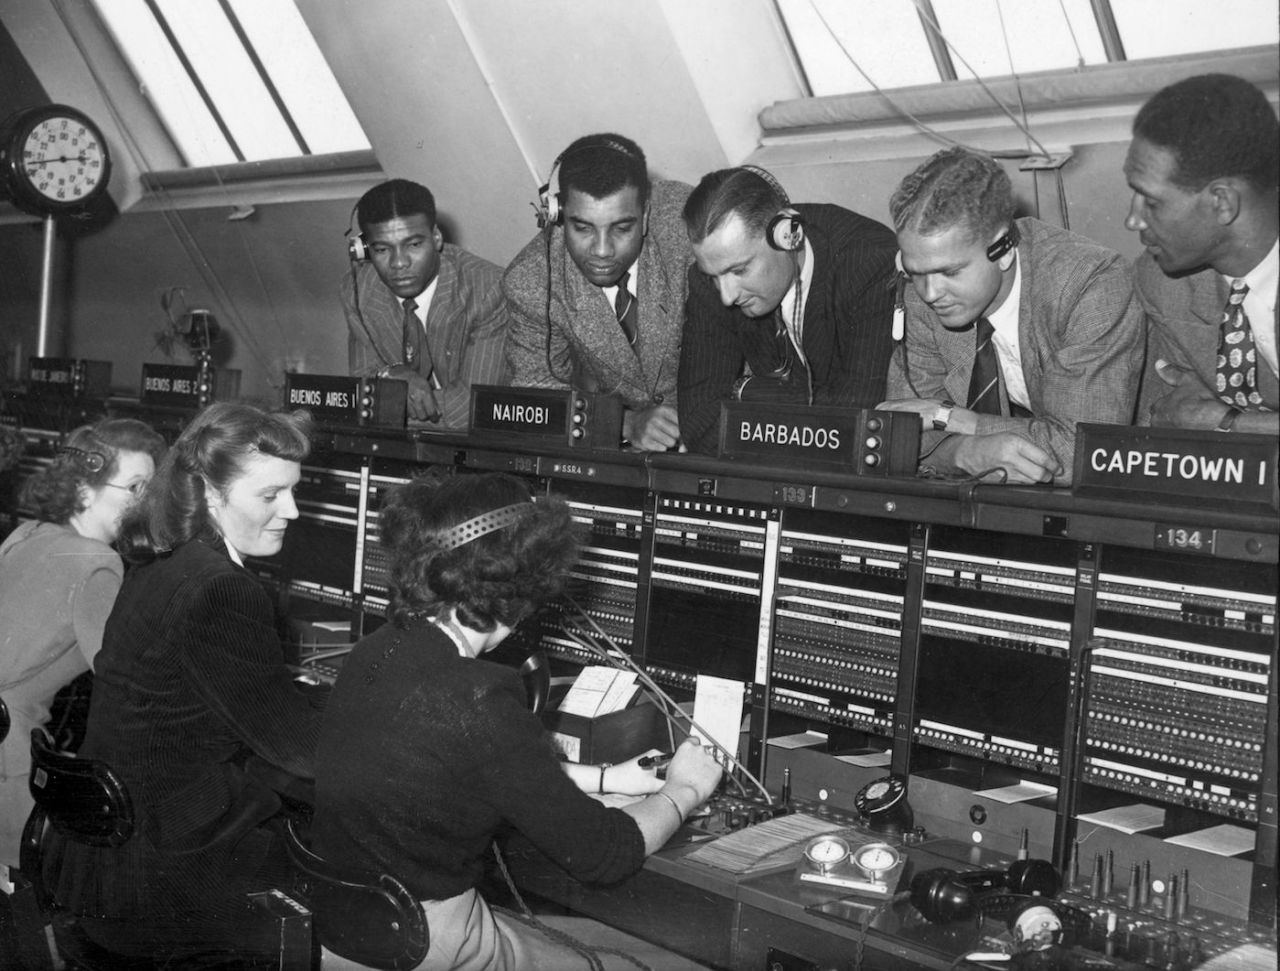 West Indies cricketers watch a telephone operator putting calls through to the West Indies for them from England, London, August 18, 1950